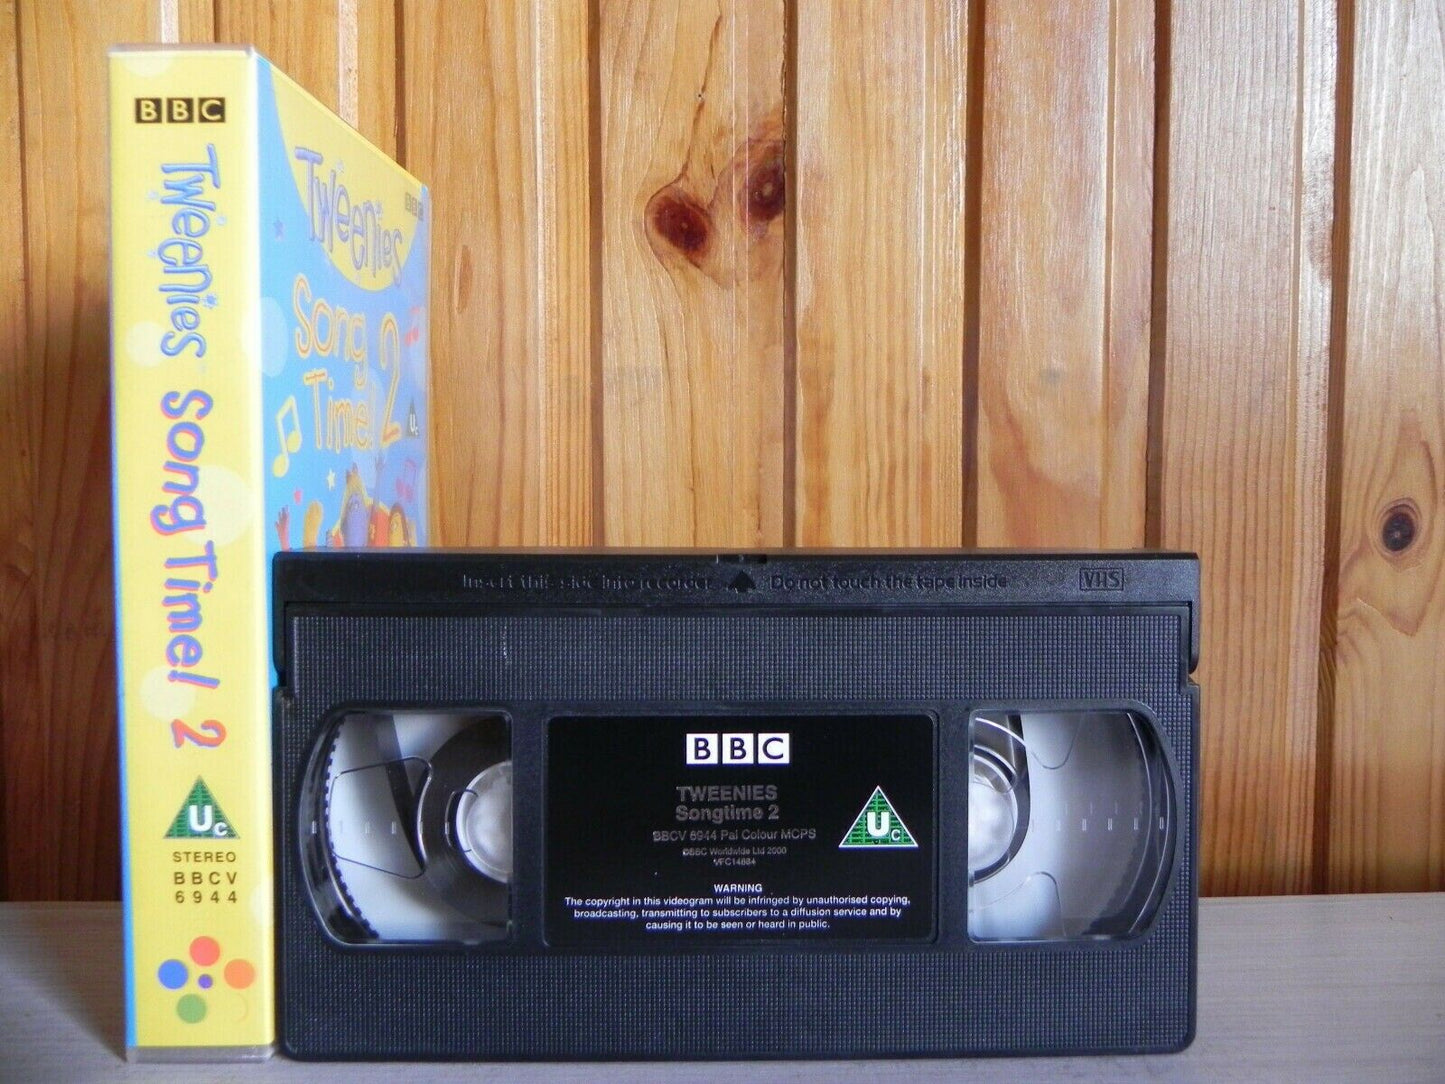 Tweenies - Song Time 2 - BBC - Runaway Train - Mousie Brown - Hot And Cold - VHS-